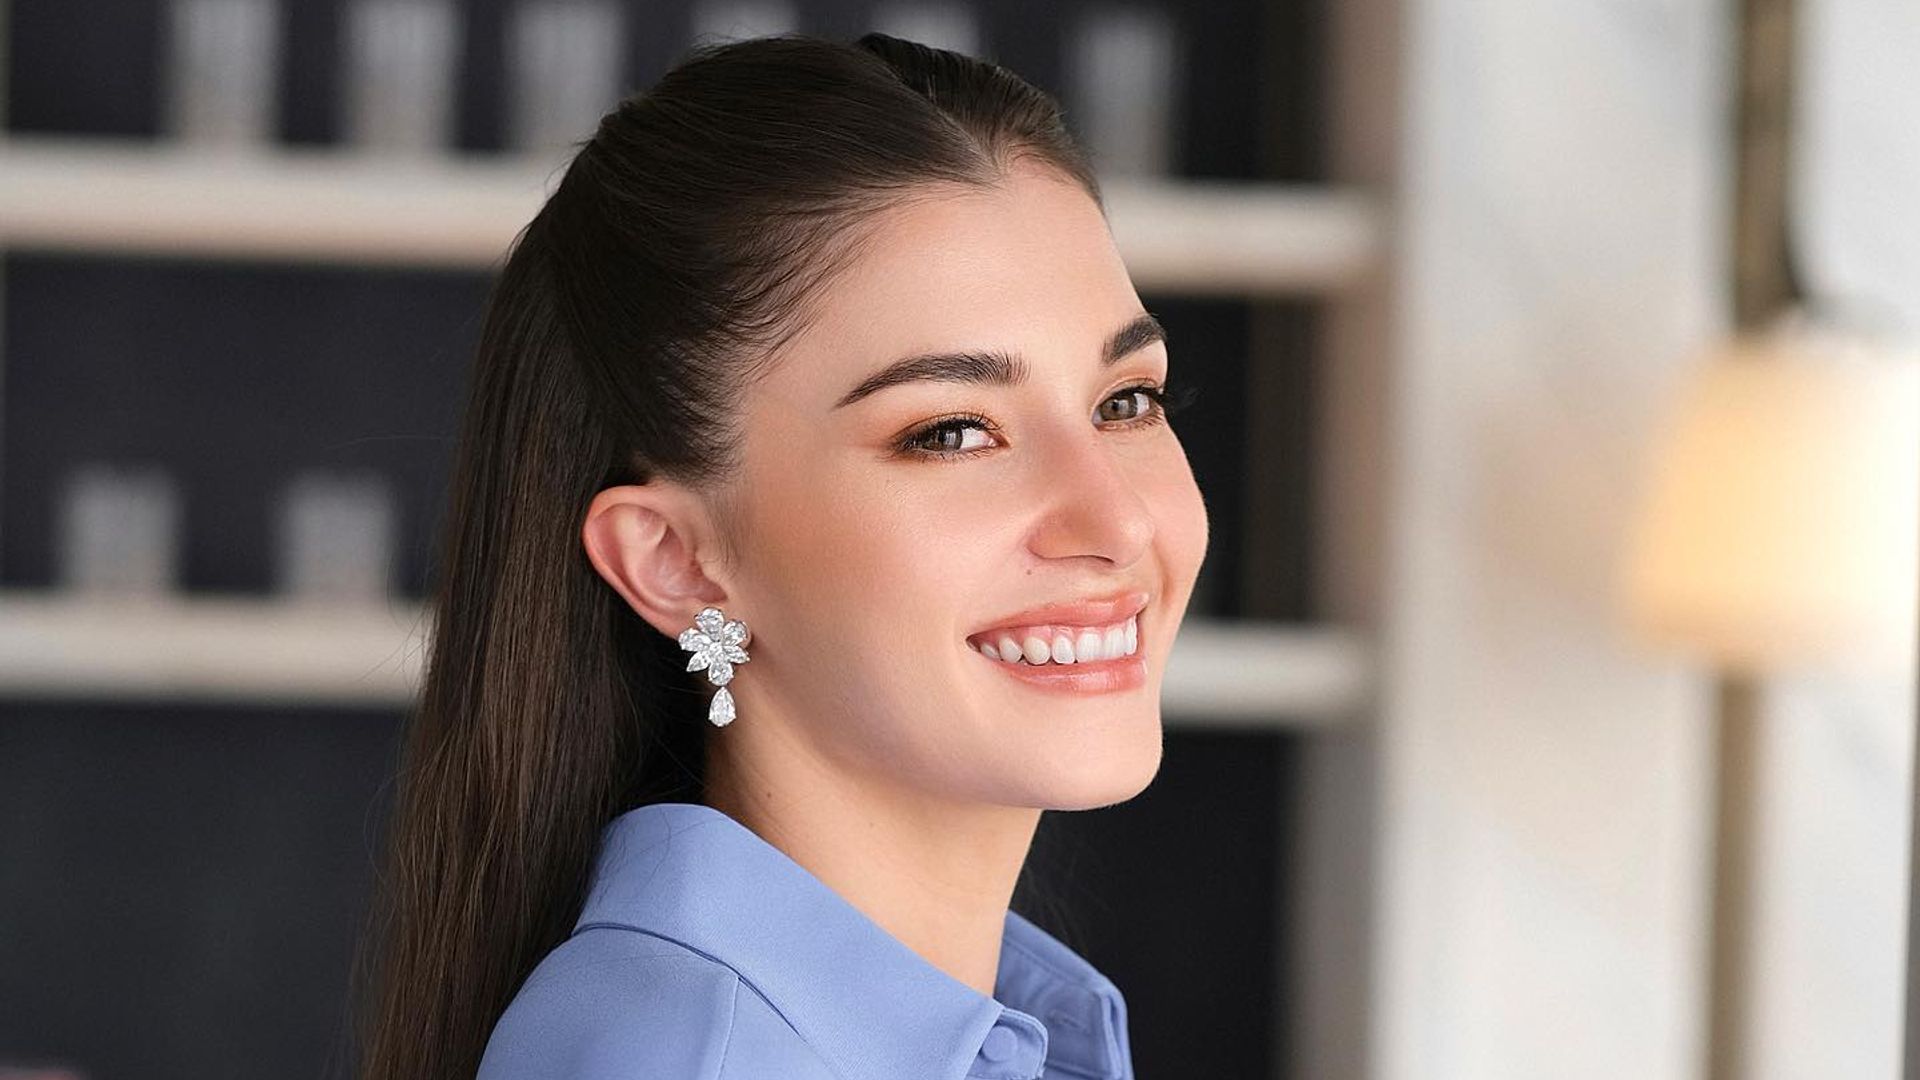 Princess Anisha Rosnah of Brunei smiles for the camera in a blue blouse and diamond earring look